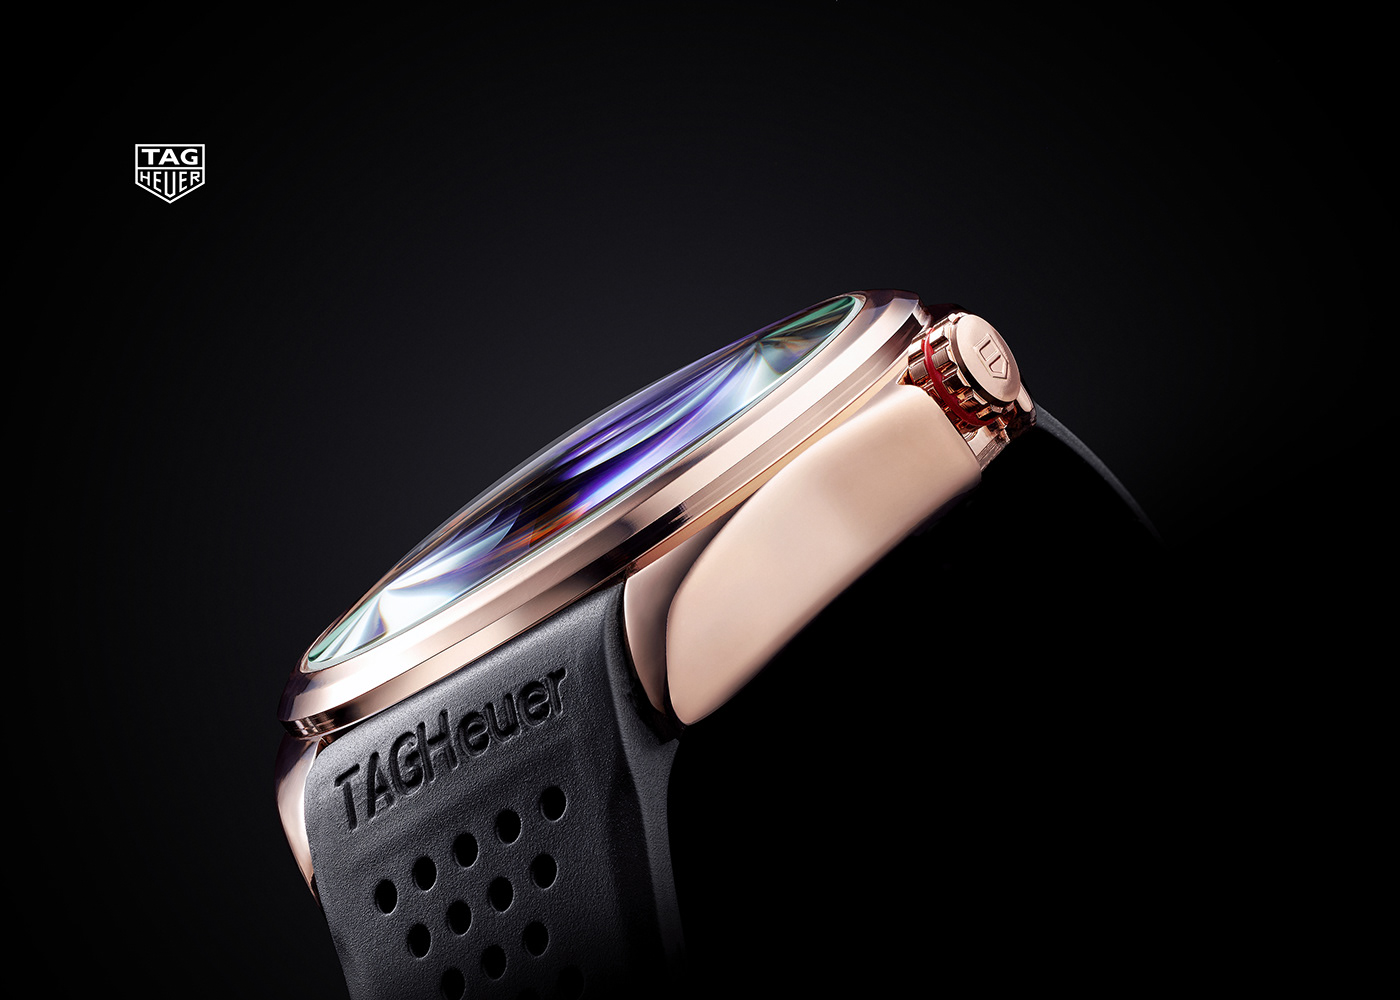 Advertising  luxury marketing   photo Photography  product tagheuer watch